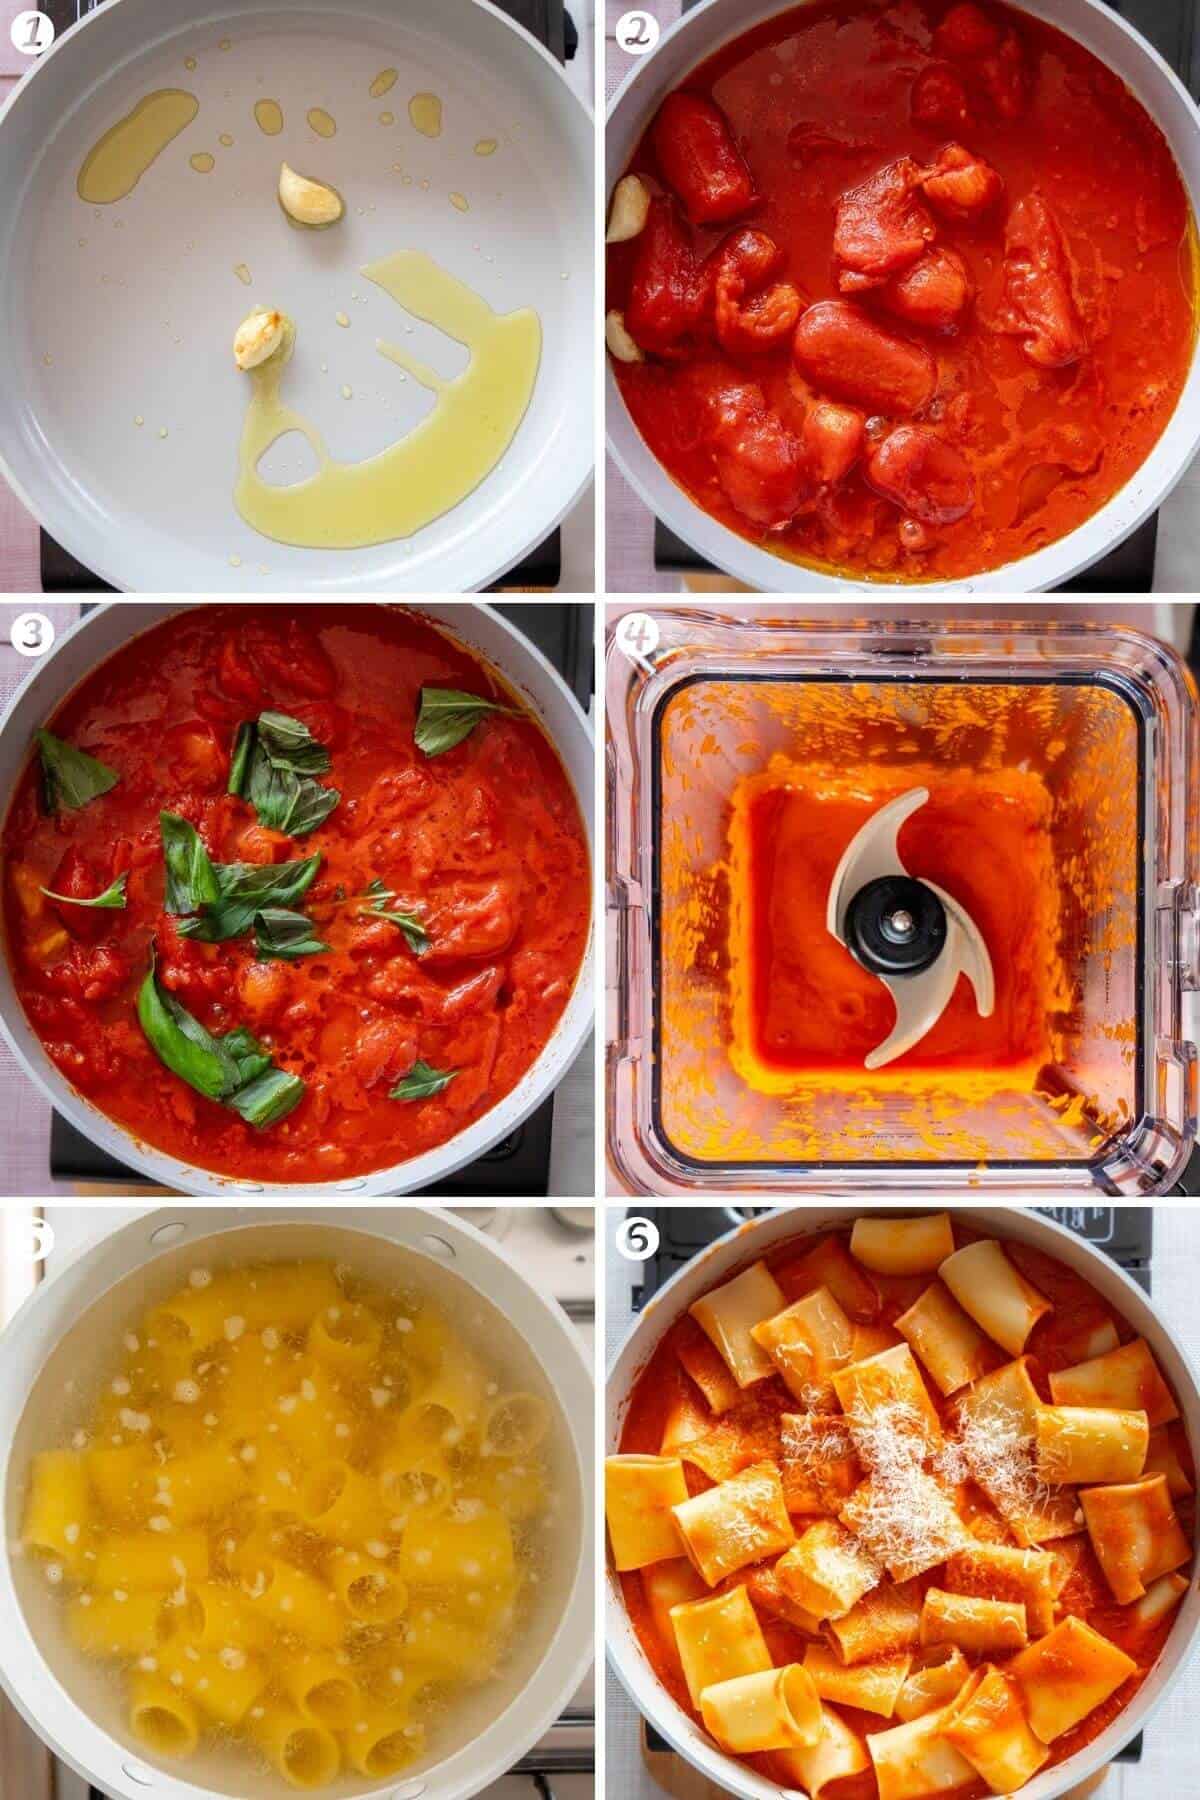 Steps on how to make the tomato sauce for burrata pasta recipe